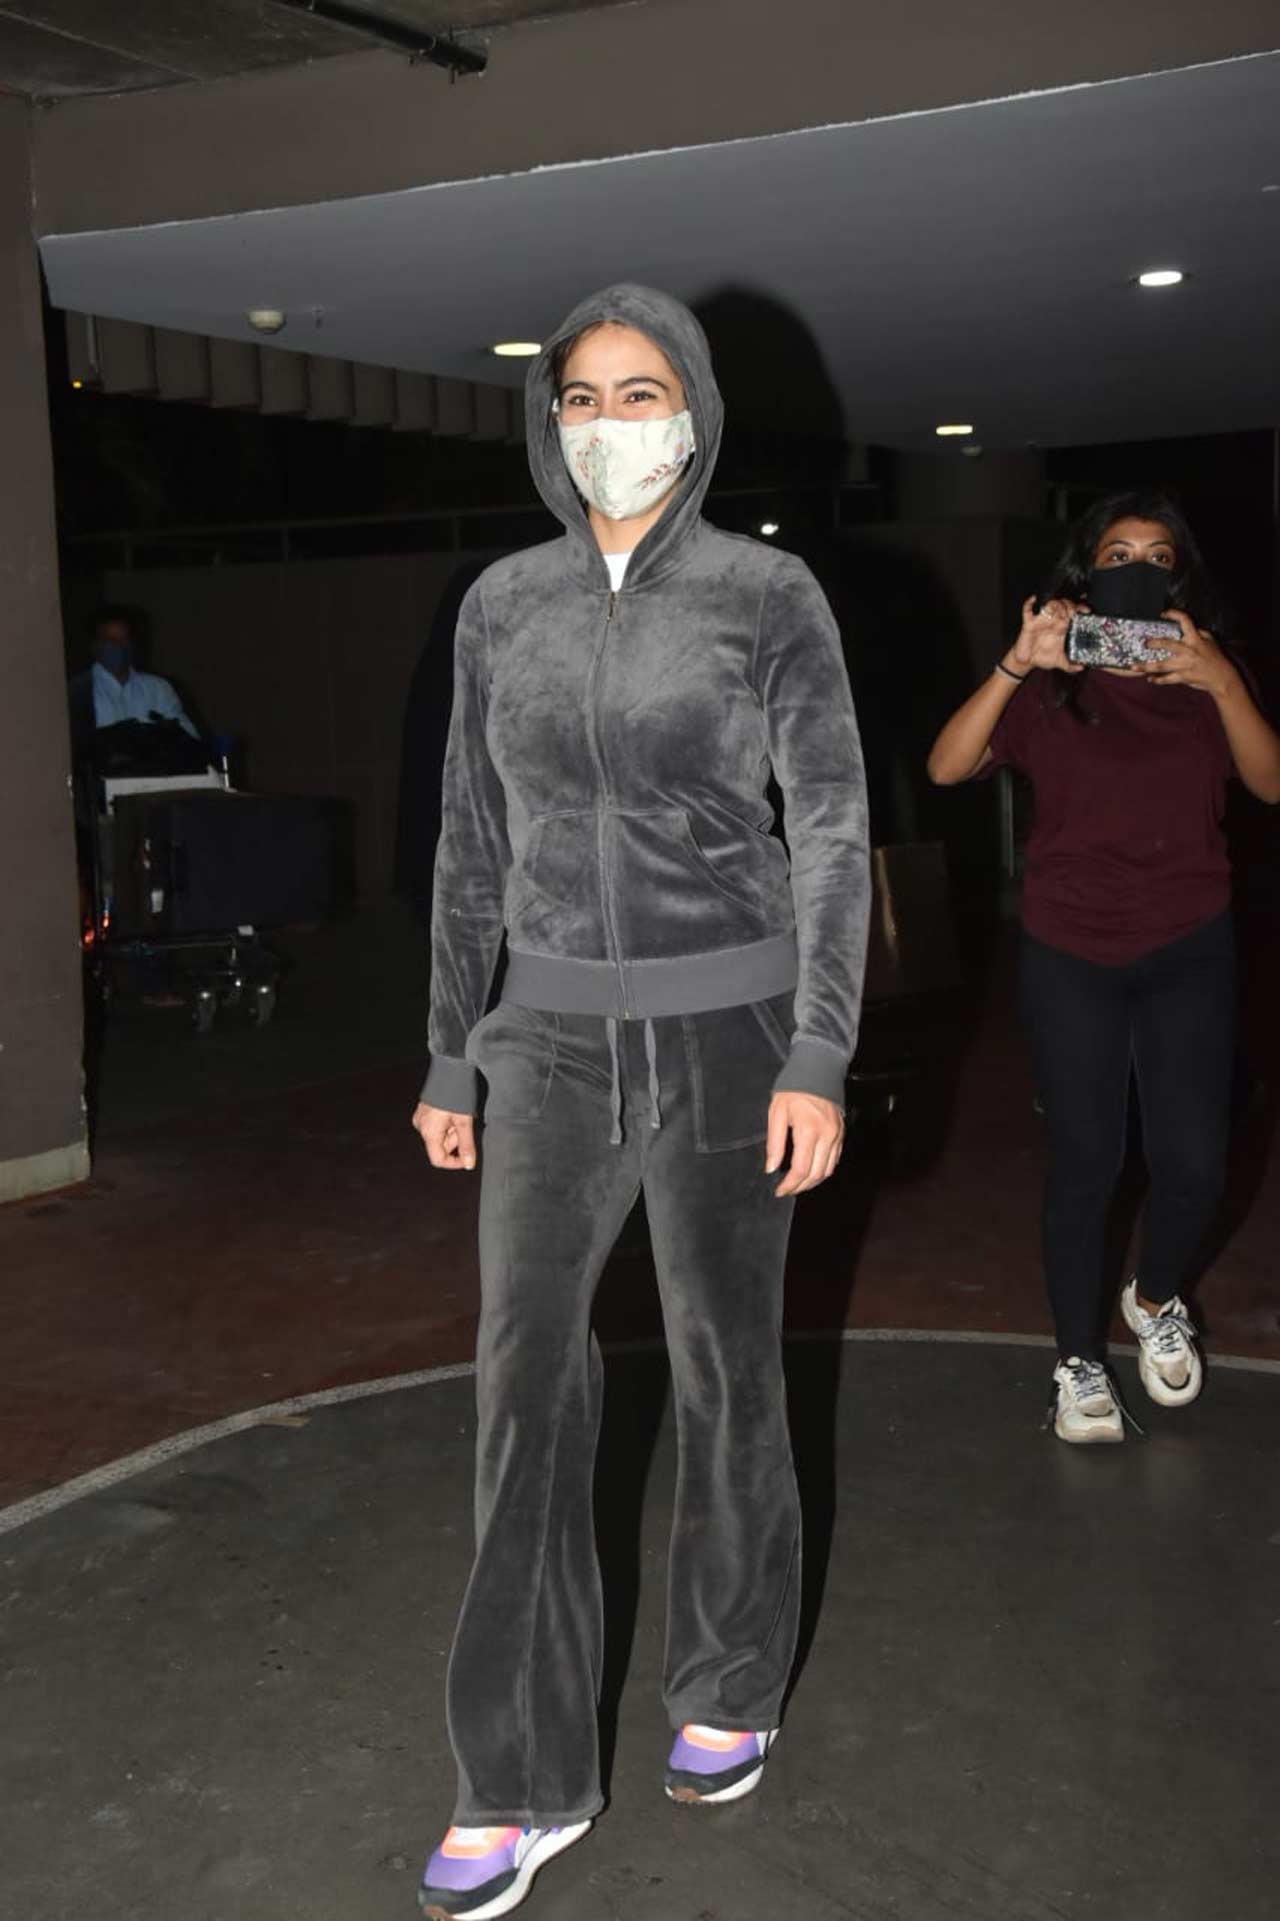 Sara Ali Khan, who was on a vacation with brother Ibrahim Ali Khan and mother Amrita Singh in Kashmir, was also clicked at the Mumbai airport. The actress opted for a velvet tracksuit for her outing.